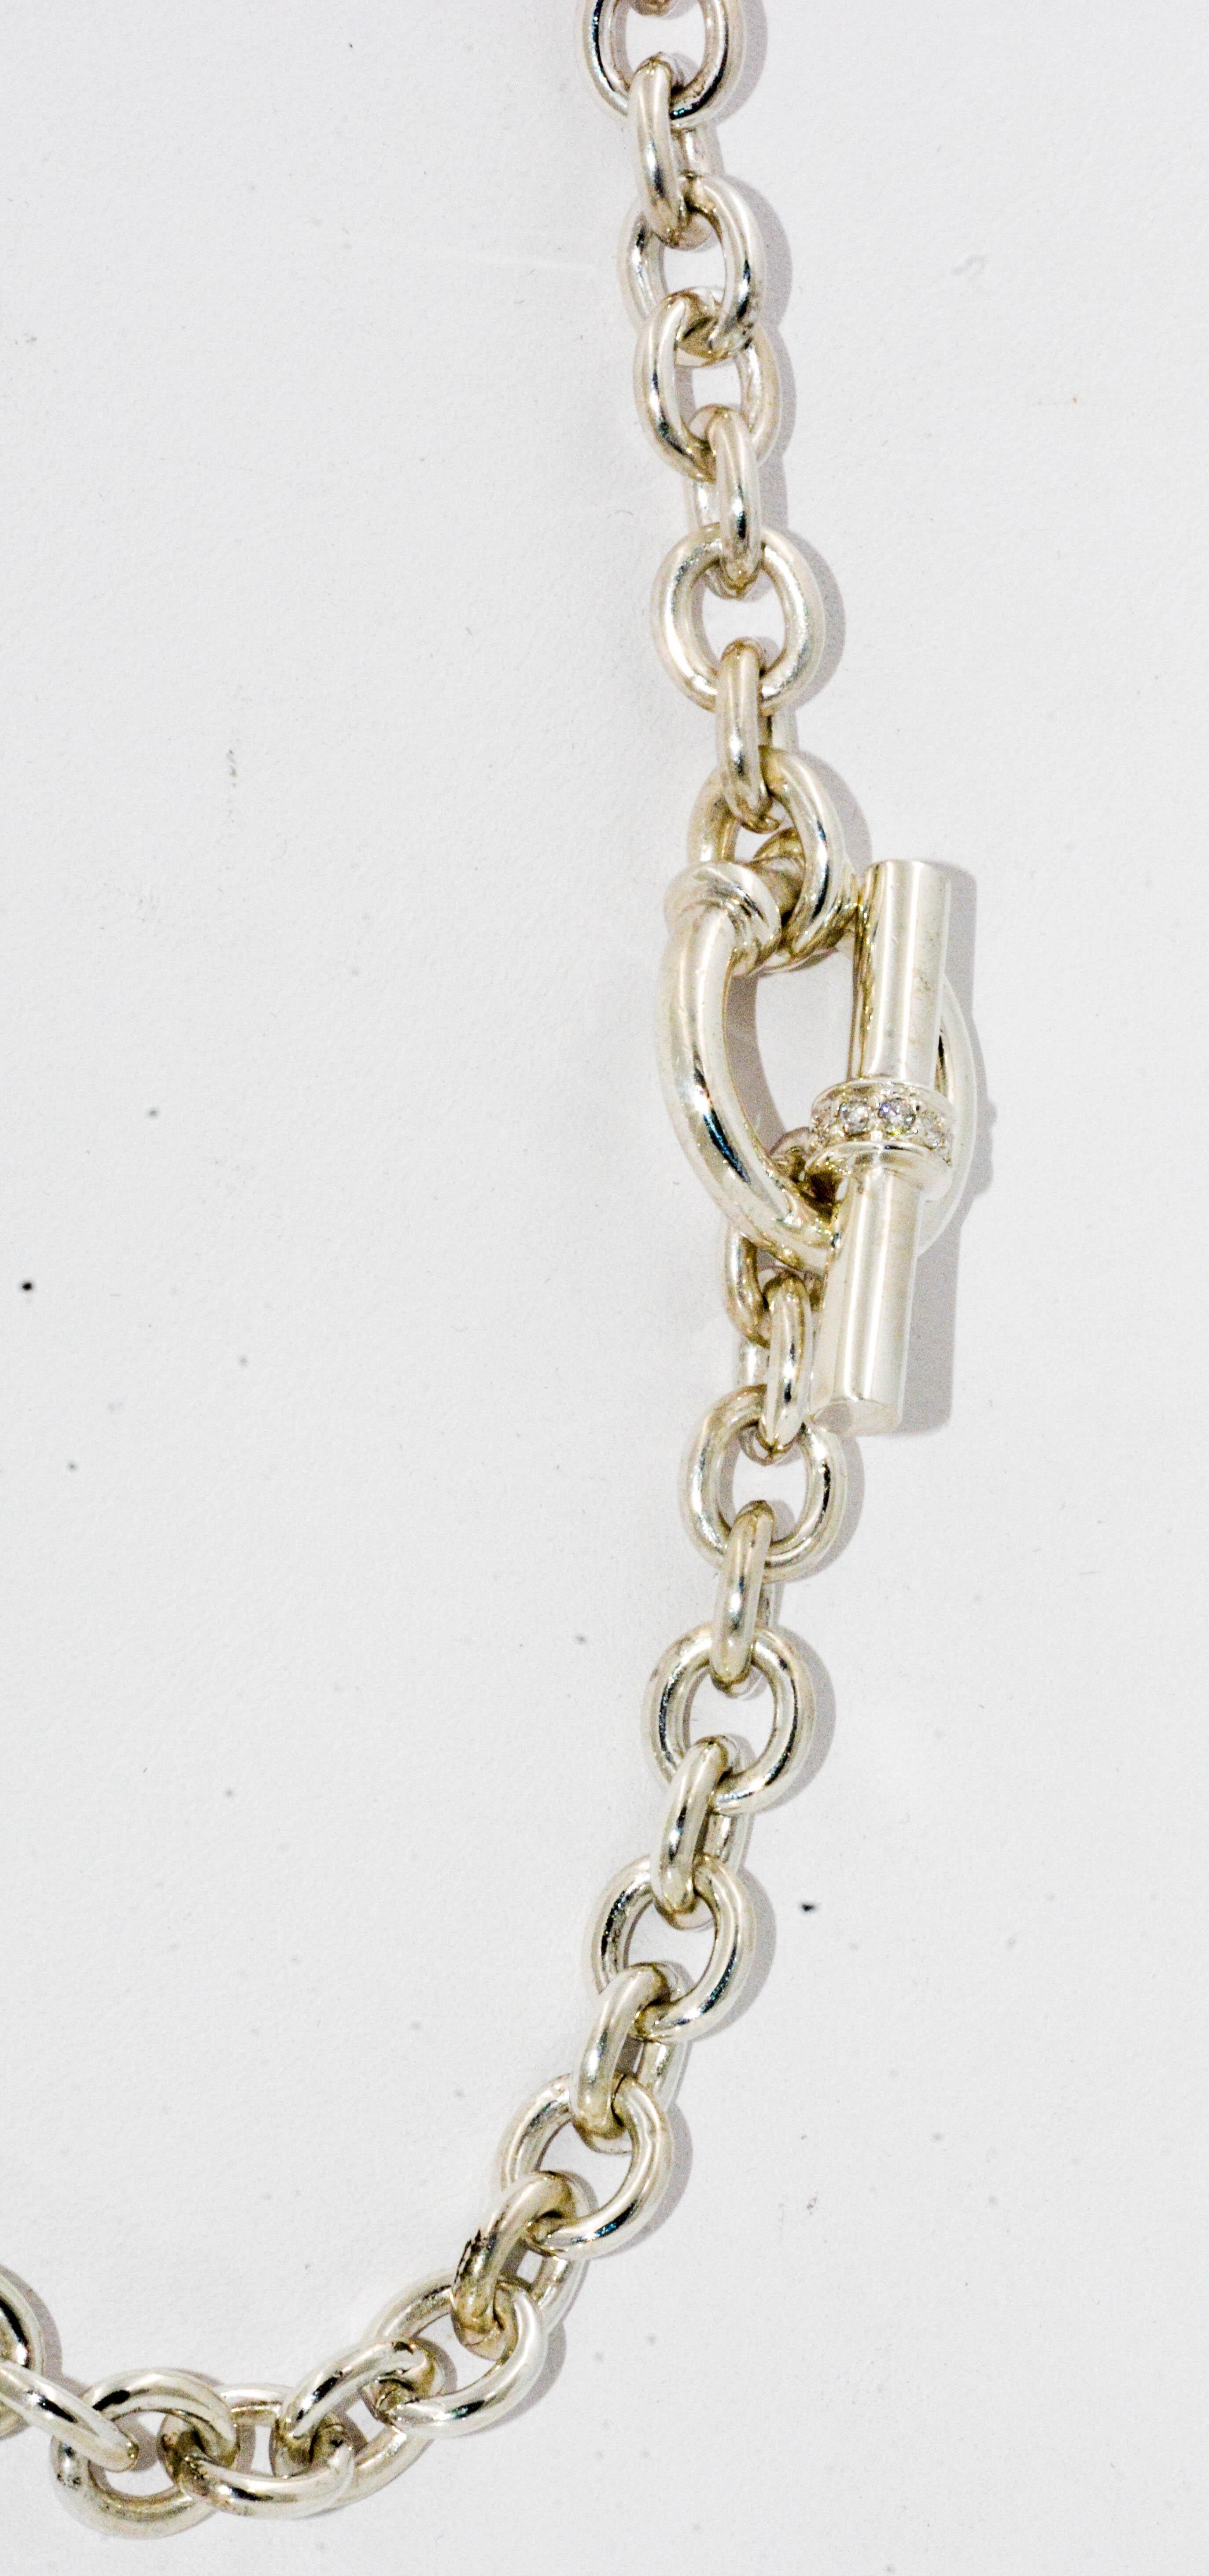 Sterling silver links are subtly jazzed with a little bling on the diamond studded toggle clasp. This simple link chain still looks fabulous and is circa 1980s. The necklace measures 16 inches, and feels quite substantial. If you love sterling